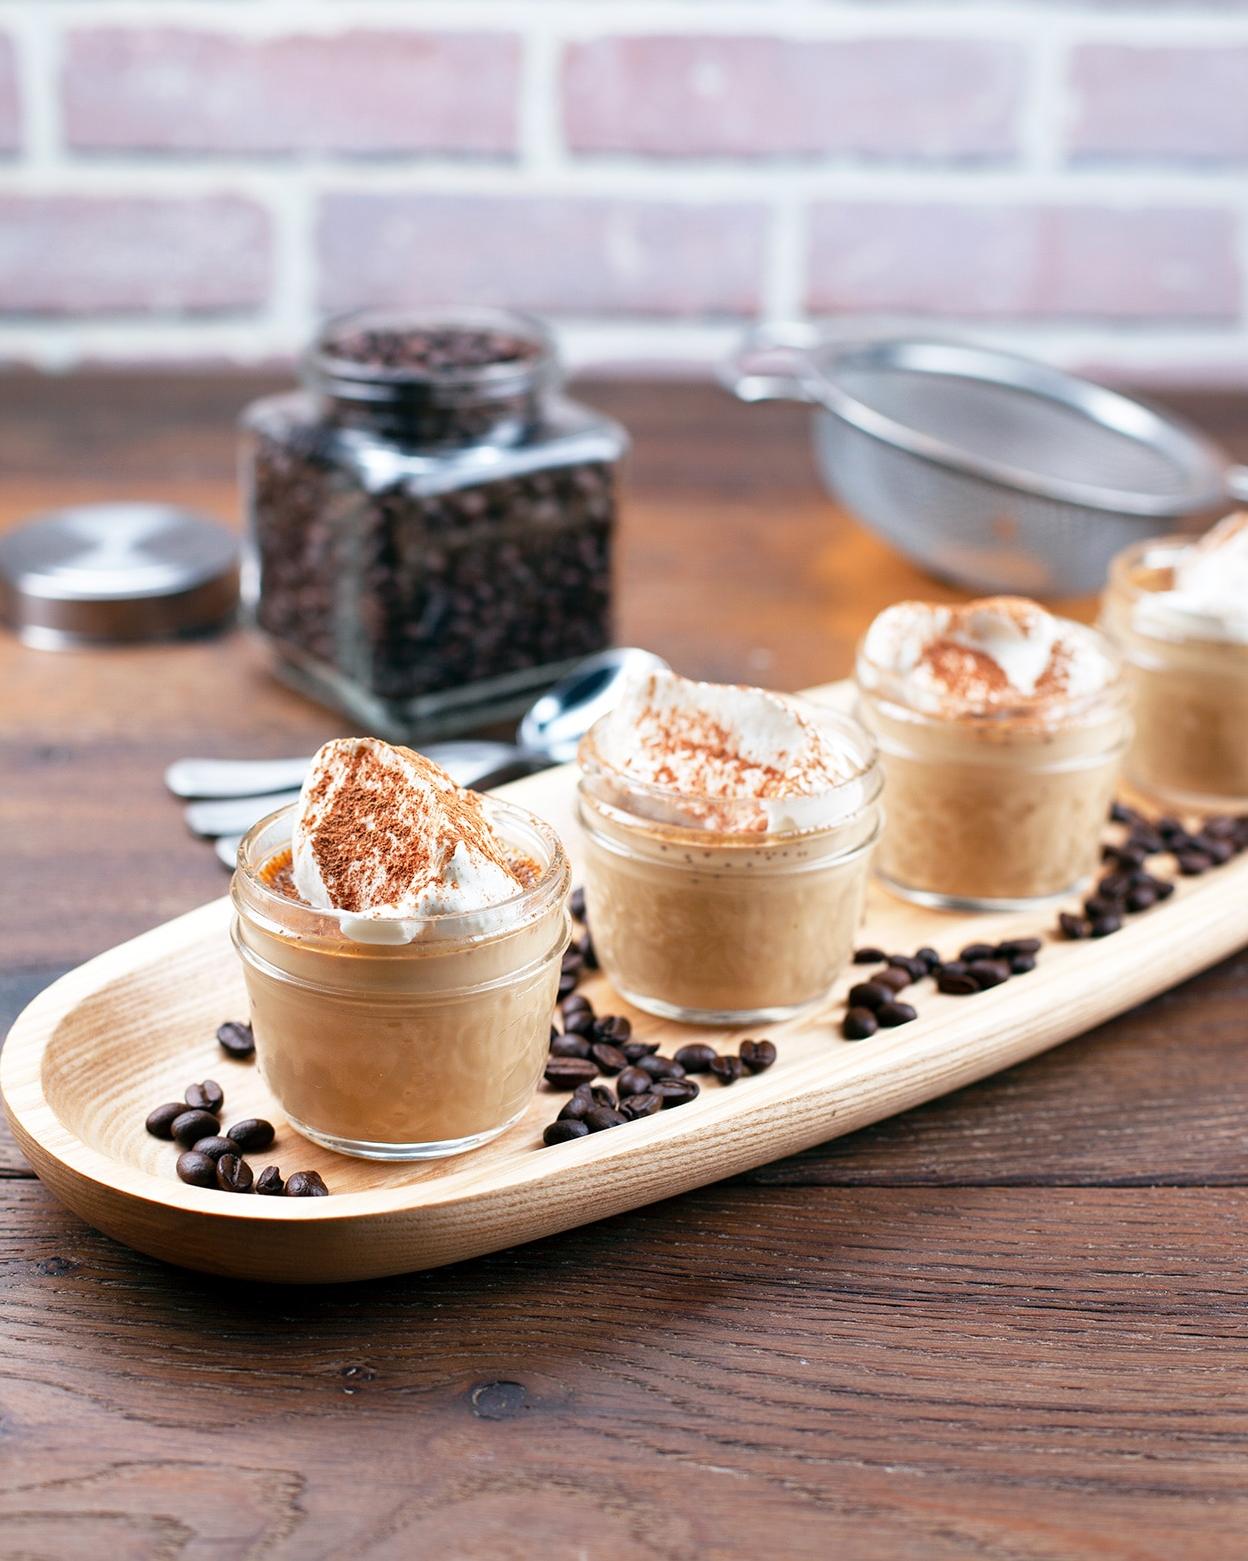  Your guests will want seconds of this coffee-infused custard.